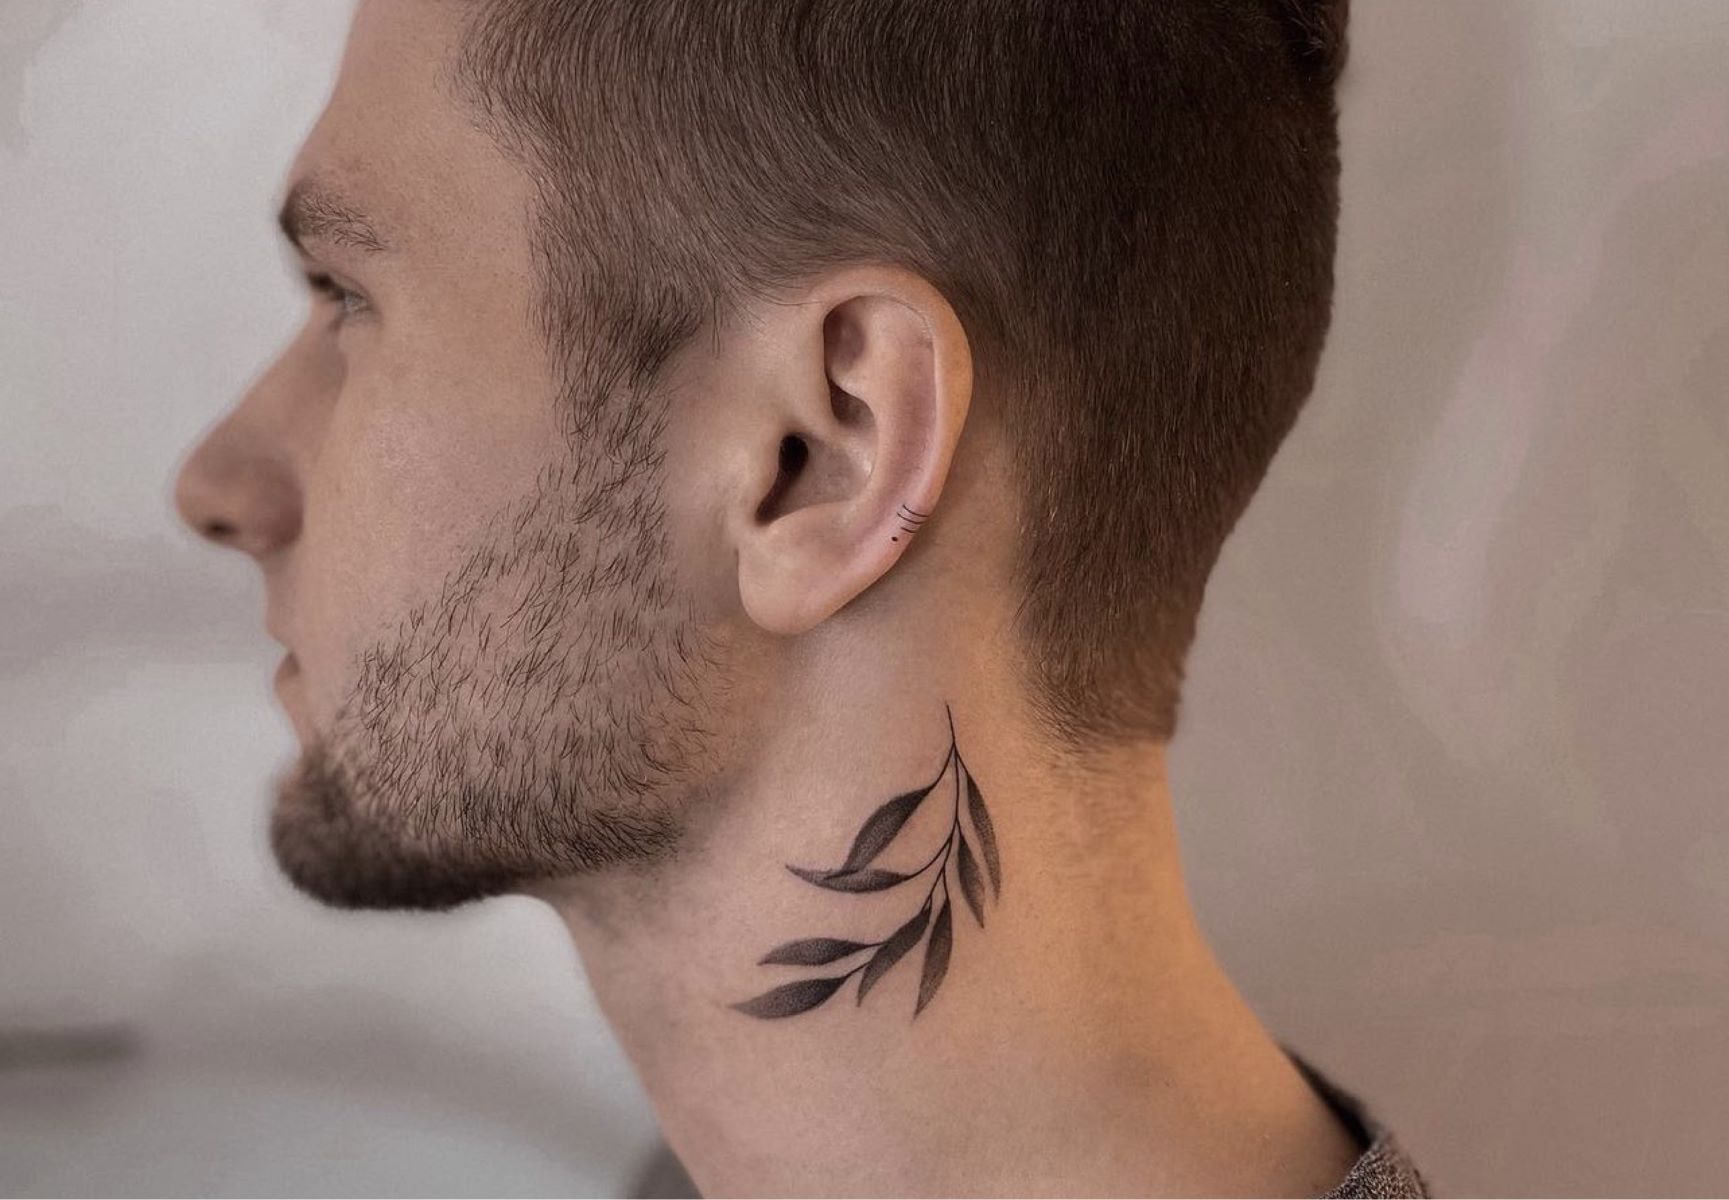 How To Convince Your 19-Year-Old To Reconsider A Neck Tattoo